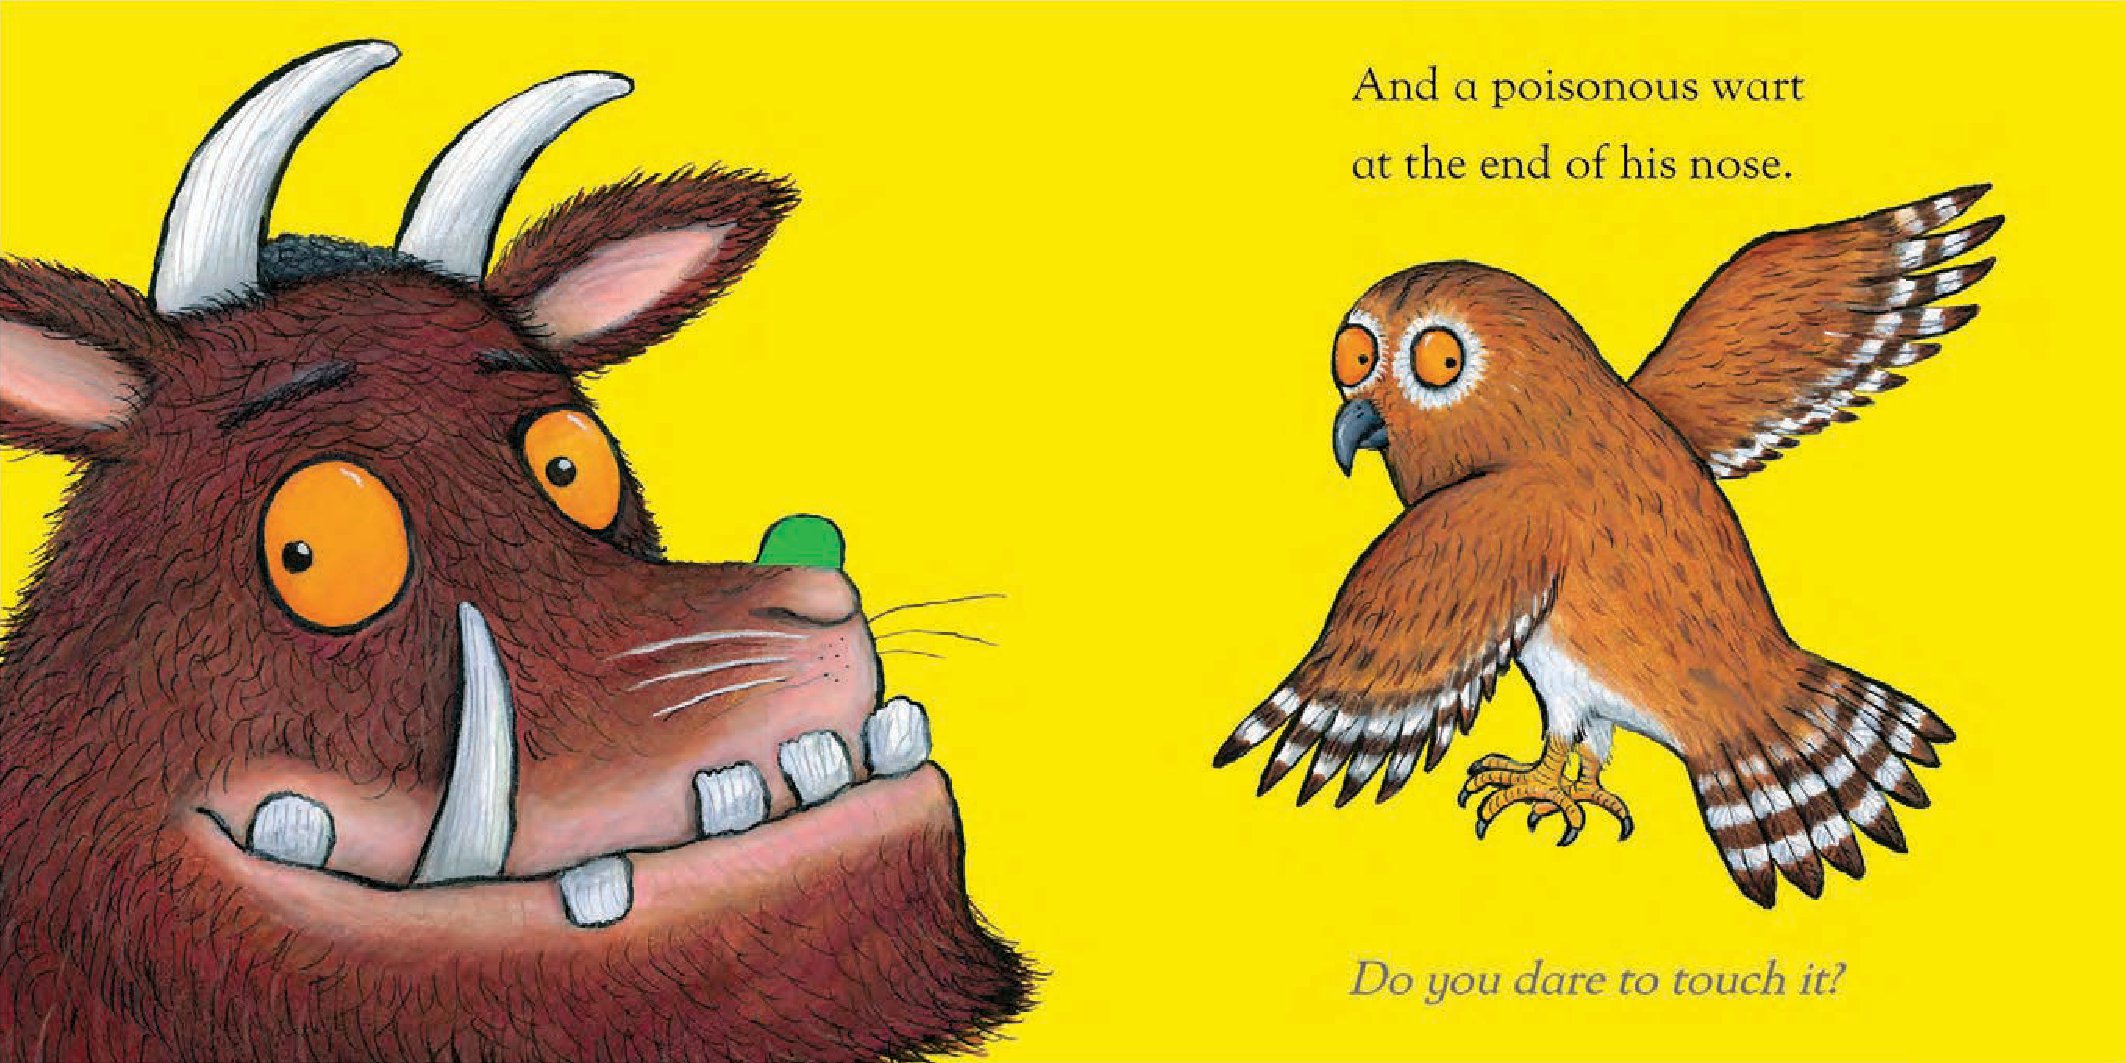 The Gruffalo Touch and Feel Book